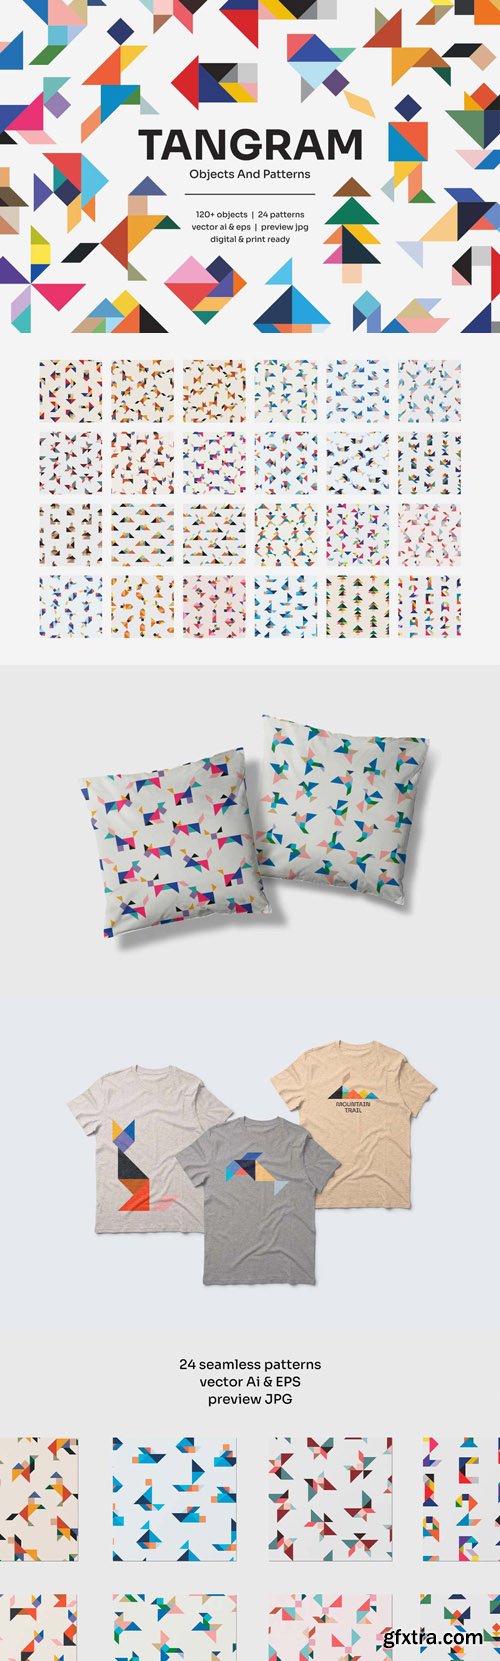 TANGRAM - Objects & Patterns - Vector Design Templates